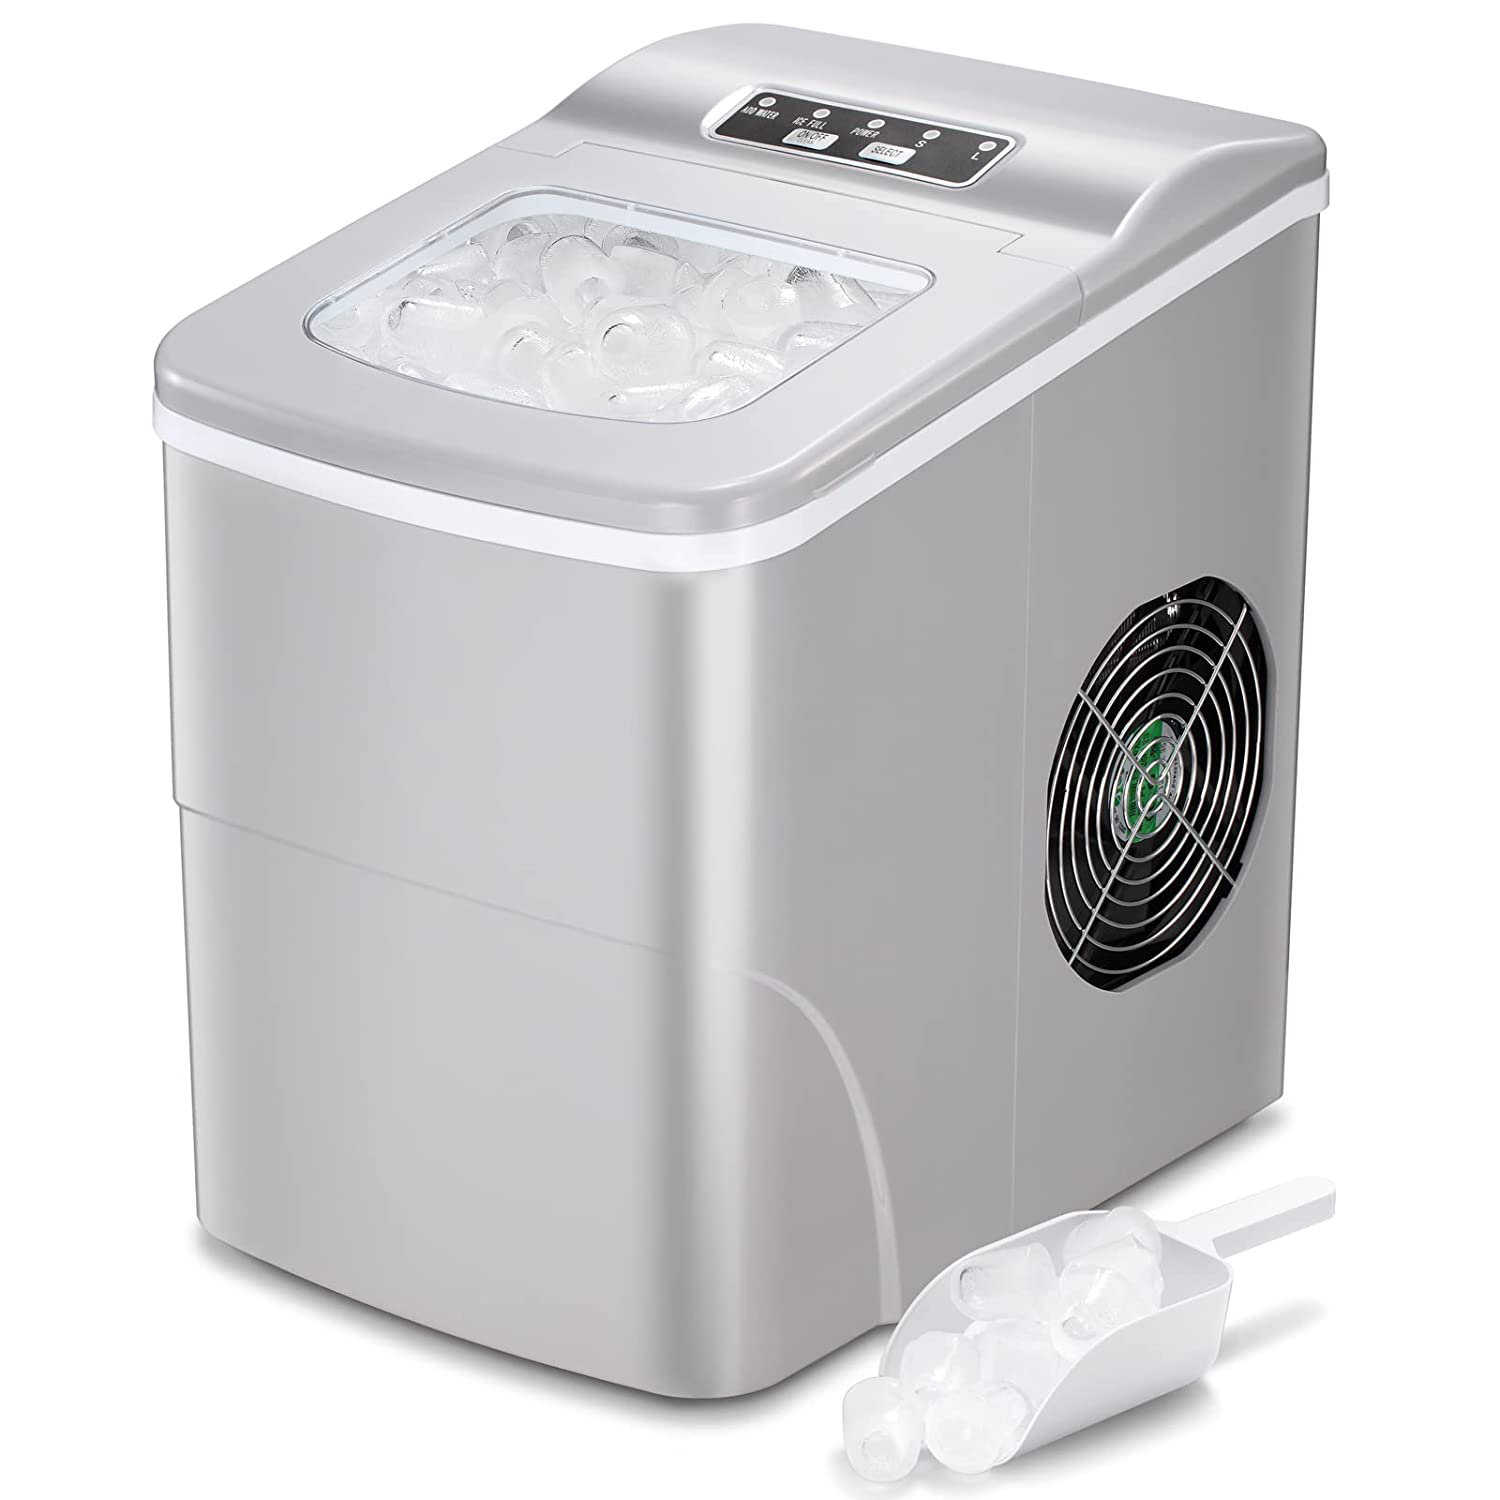 COWSAR 26 lb. Daily Production Ice Portable Ice Maker, Size 9.0 H